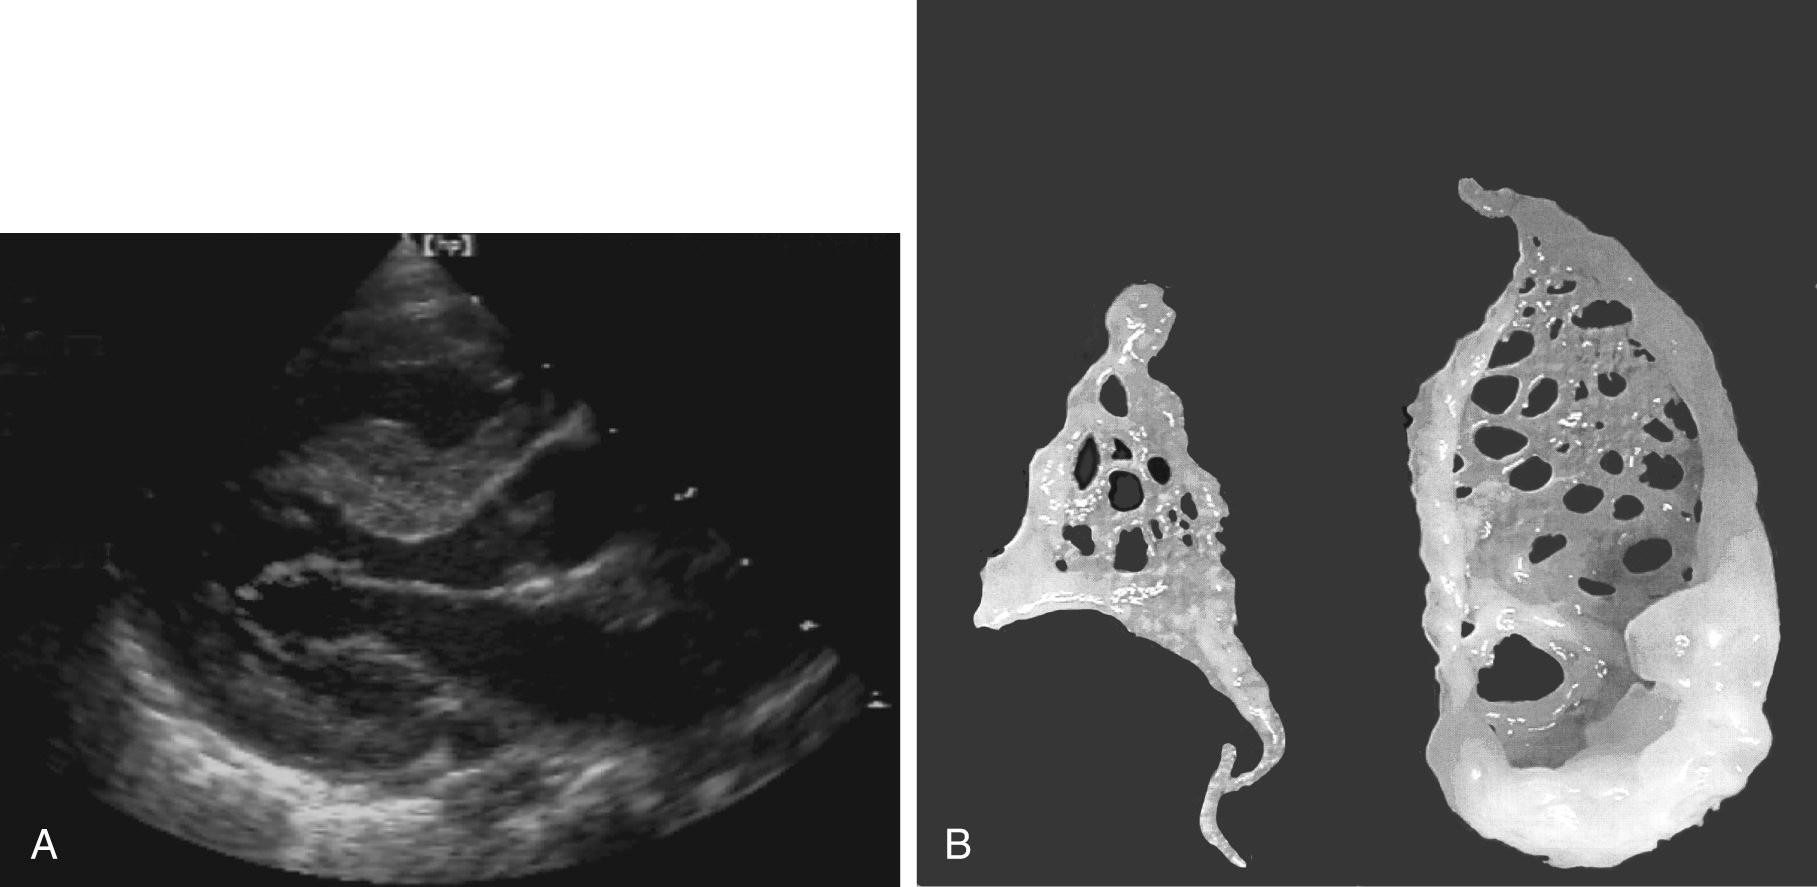 FIGURE 127-4, Accessory mitral valve tissue. A, Long-axis view. The accessory mitral valve tissue is attached to the anterior and posterior leaflets of the mitral valve and blown like a windsock. B, Macroscopic view of the same tissue after surgical resection is characteristic of accessory mitral valve tissue attached to the suspension apparatus.